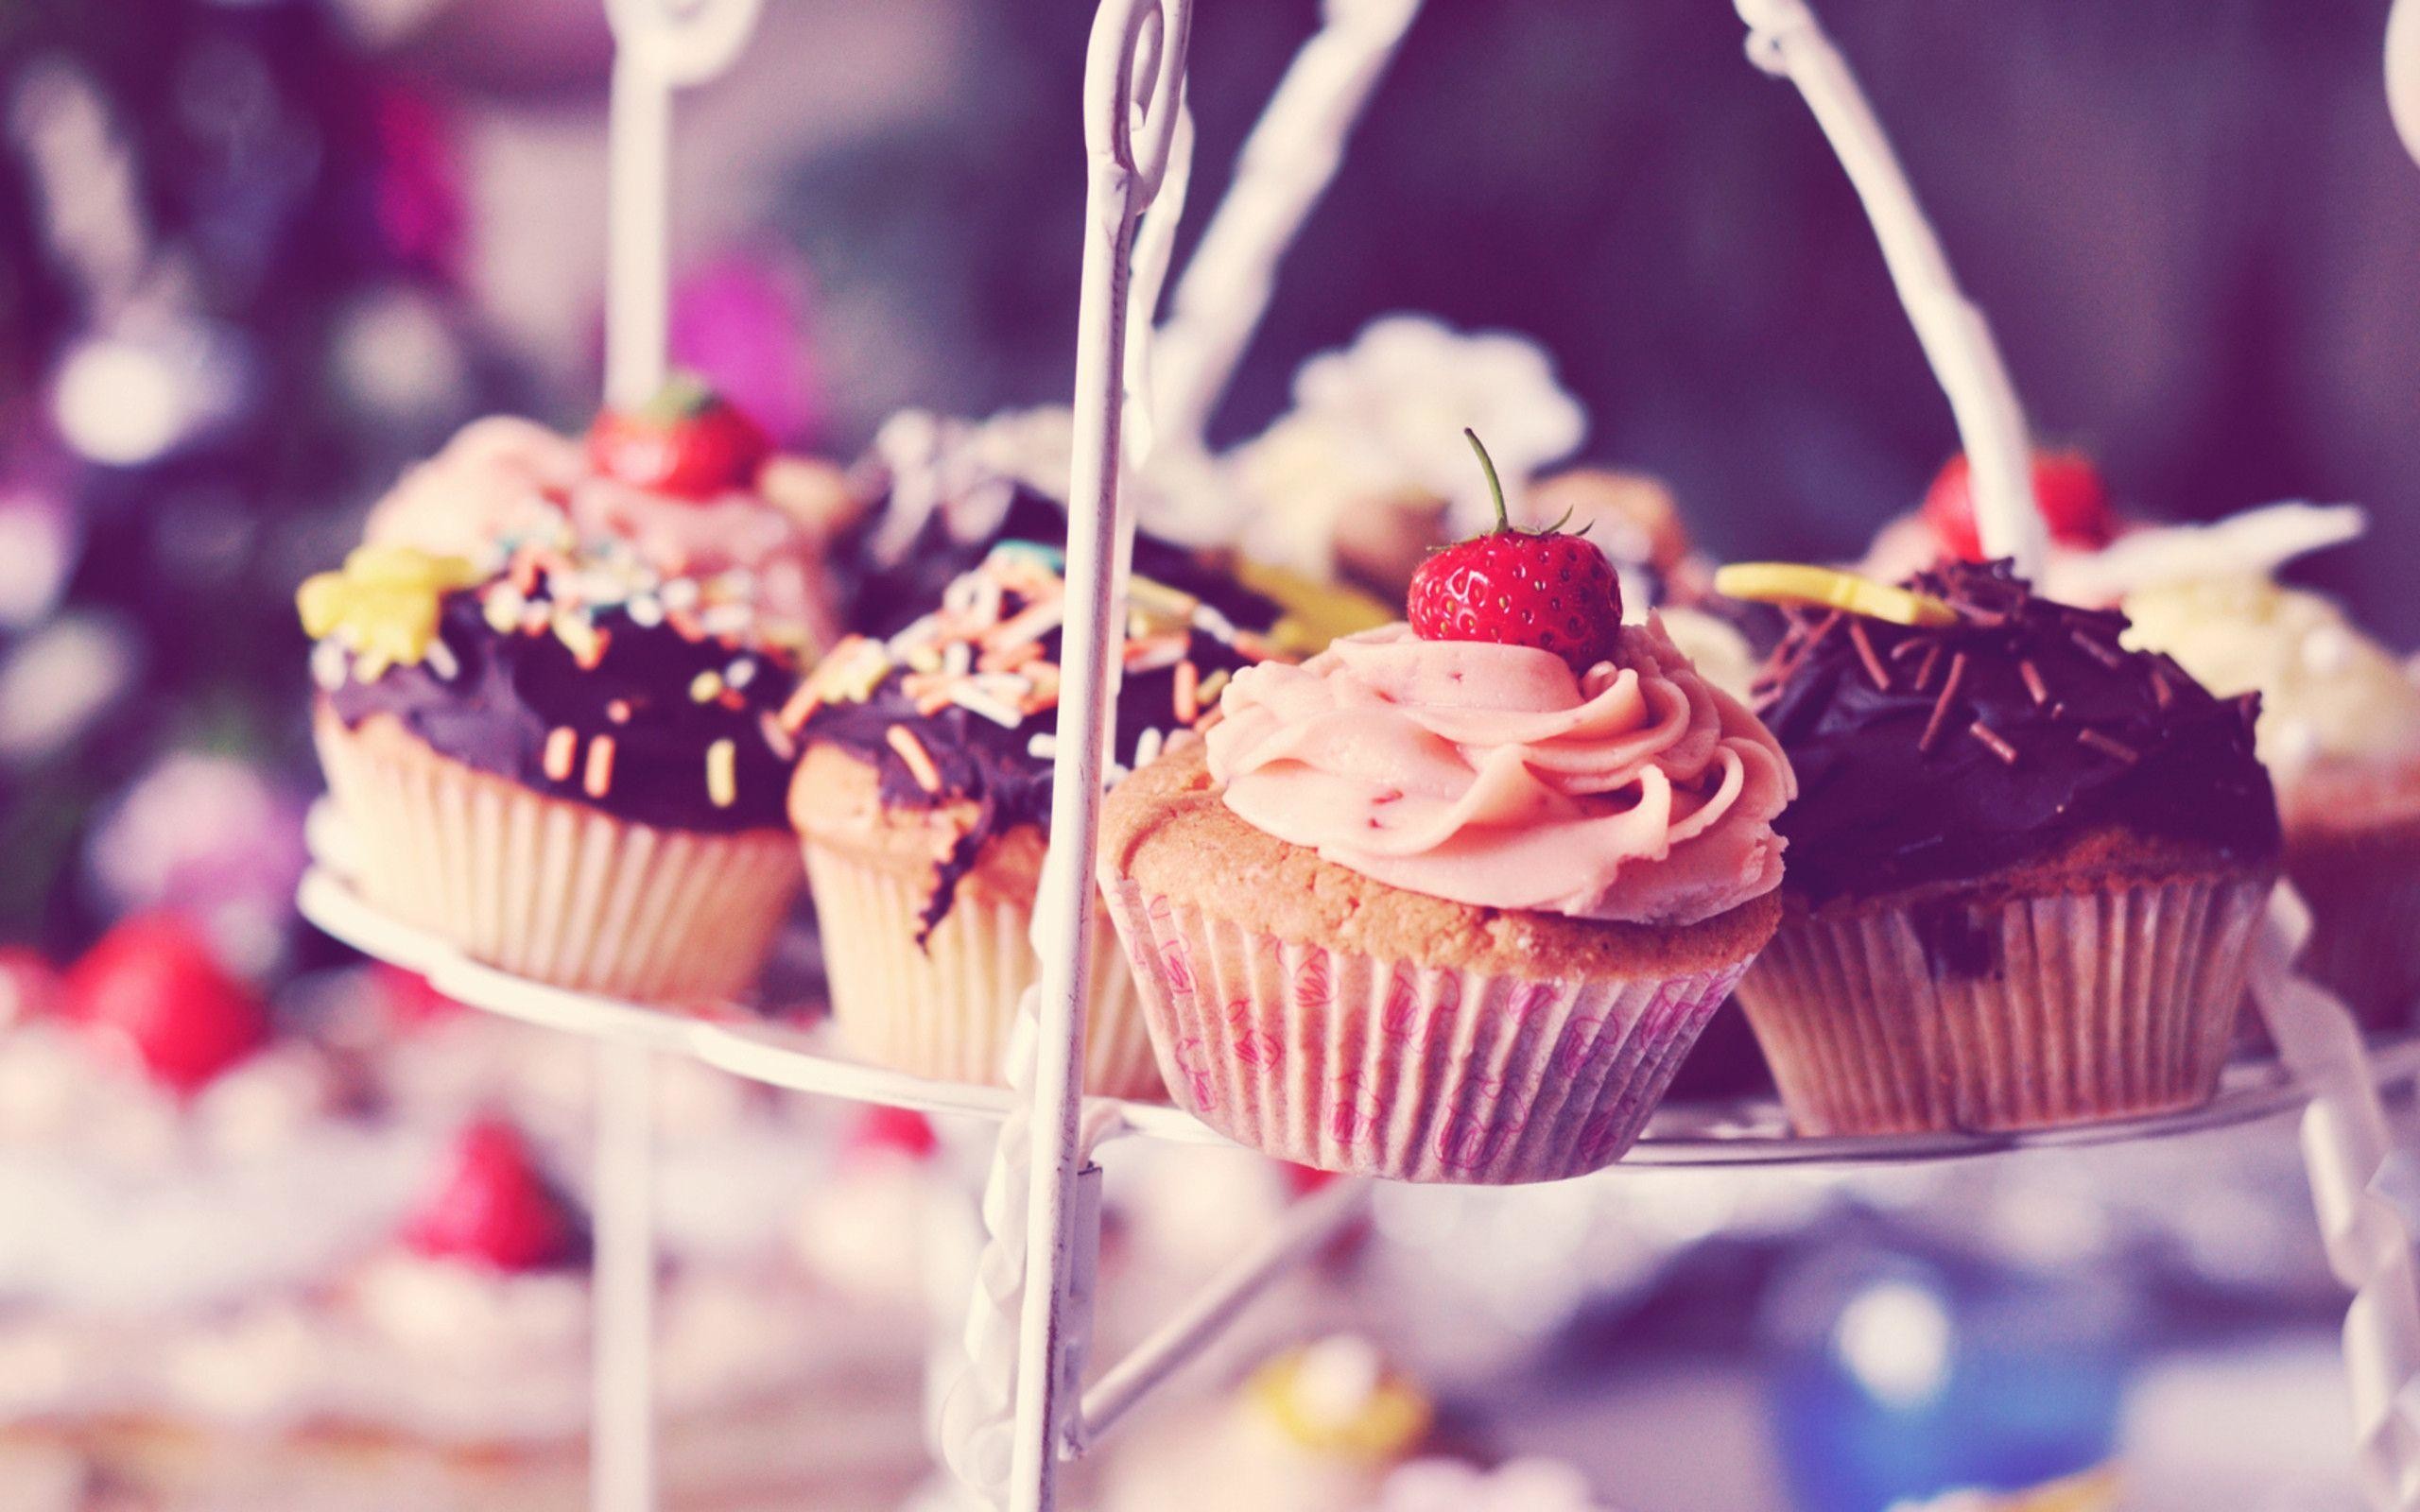 2560x1600 127 Cupcake Wallpapers | Cupcake Backgrounds Page 2